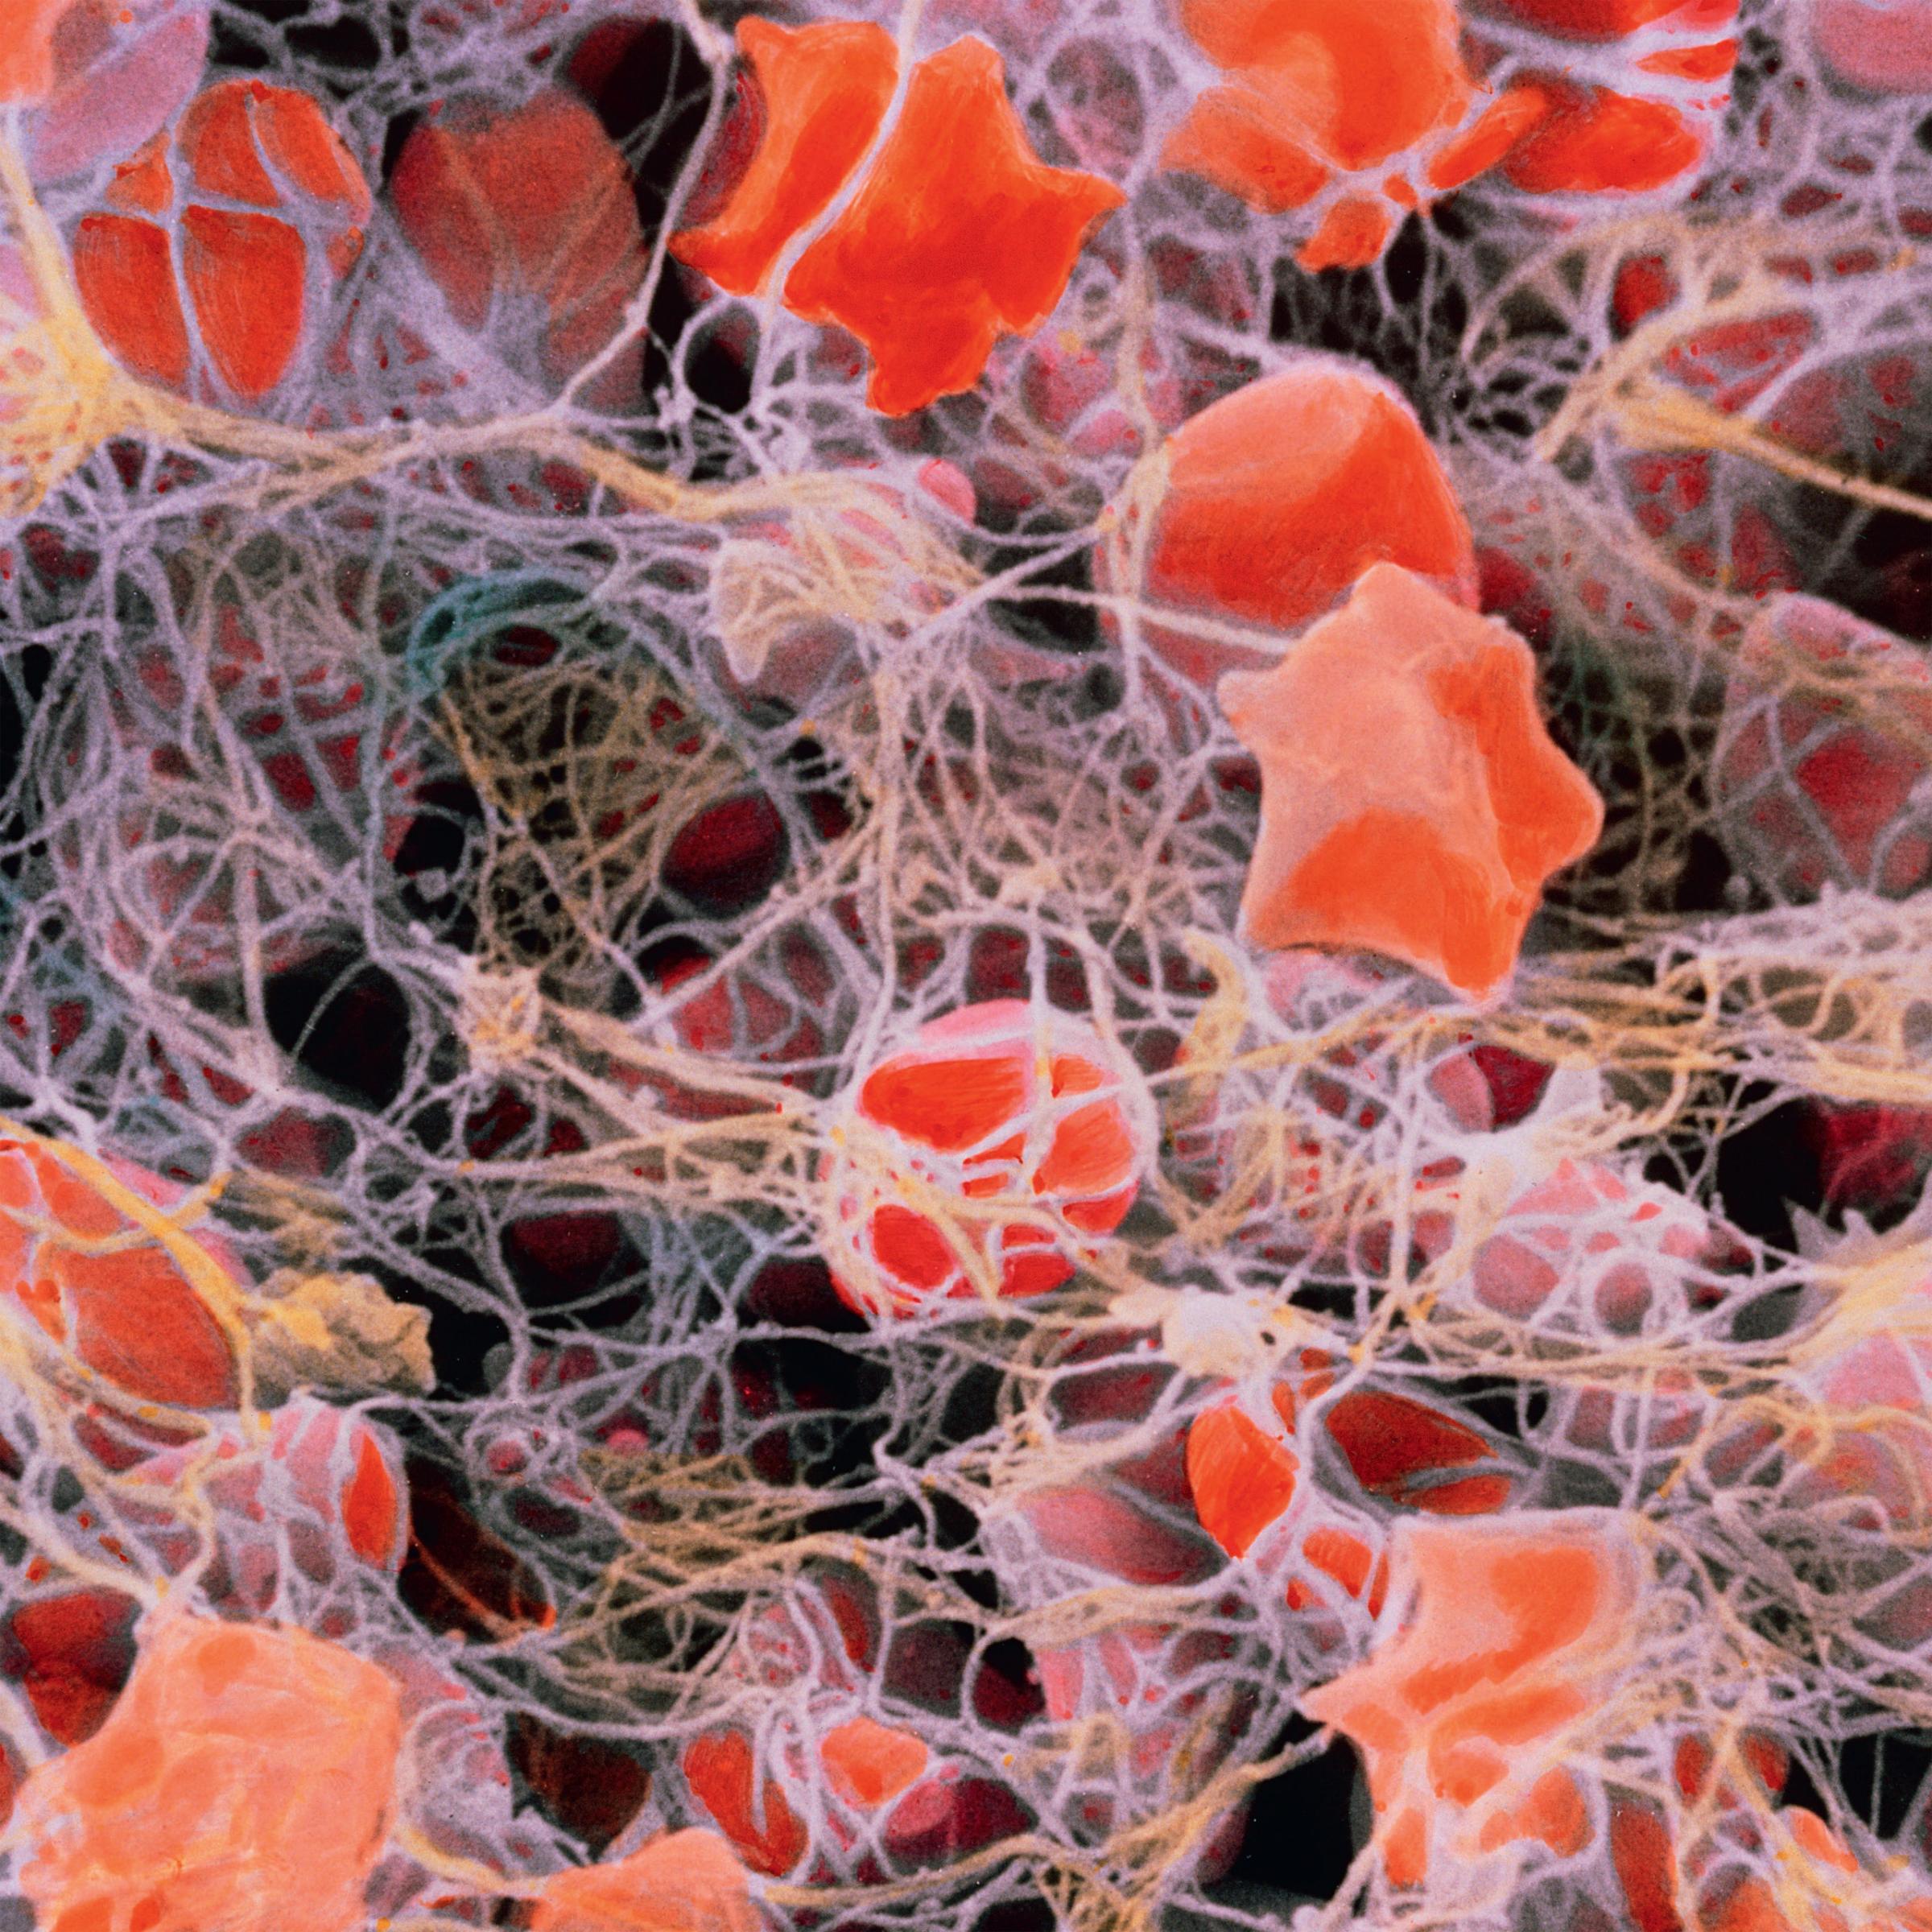 Blood clot (coloured scanning electron micrograph)